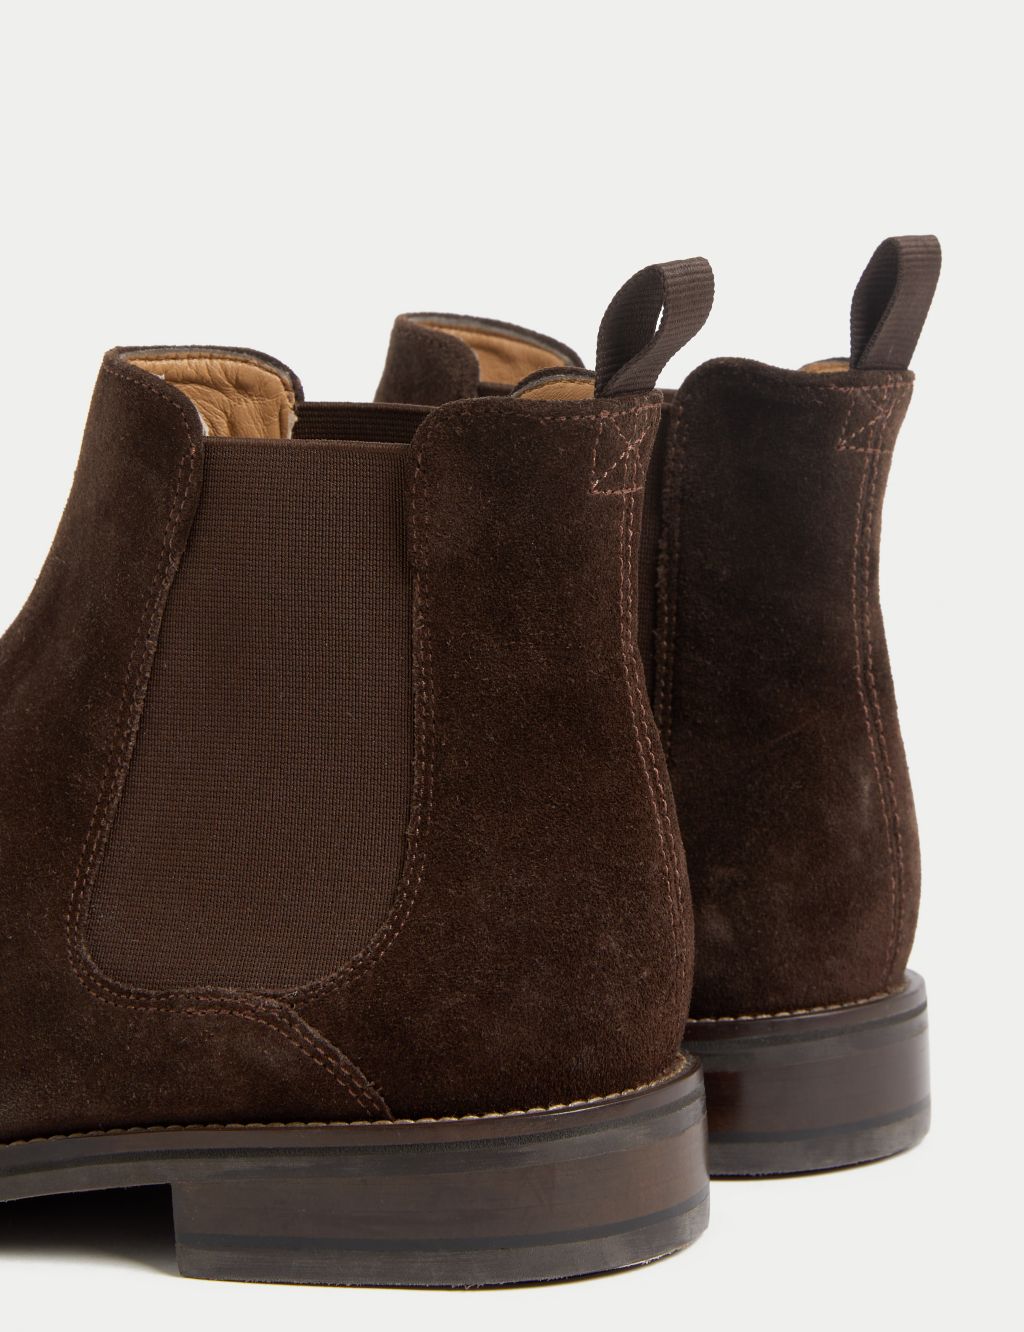 Suede Pull-On Chelsea Boots image 2